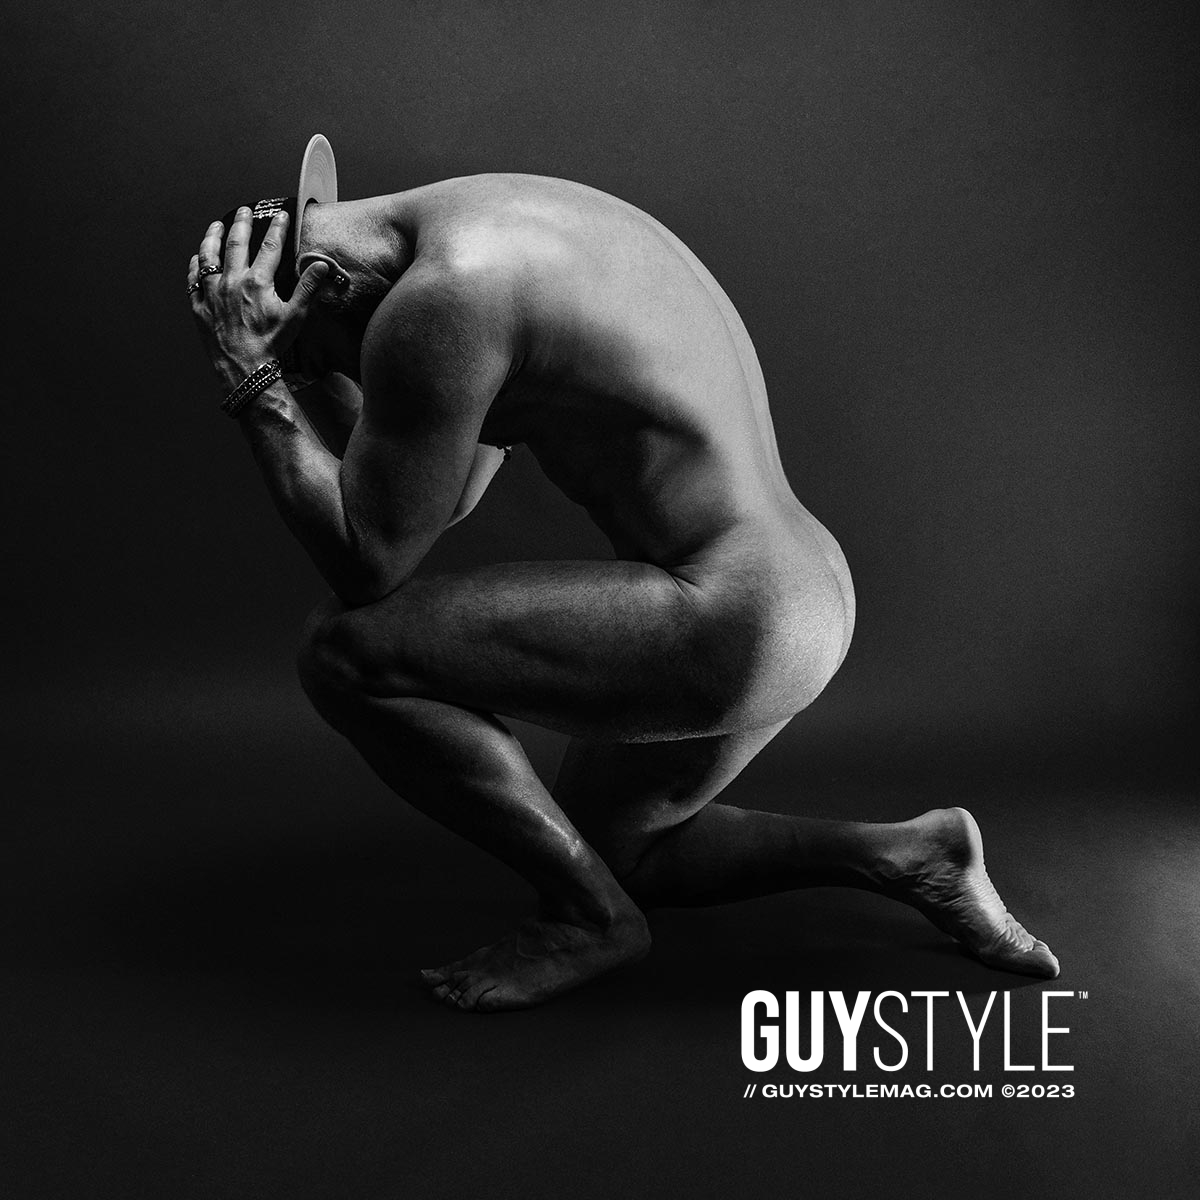 Maxwell Alexander: Capturing the Male Form as a Defiant Stand Against Homophobia in Art and Society – Presented by NYC Queer Boudoir Experience – Duncan Avenue Studios